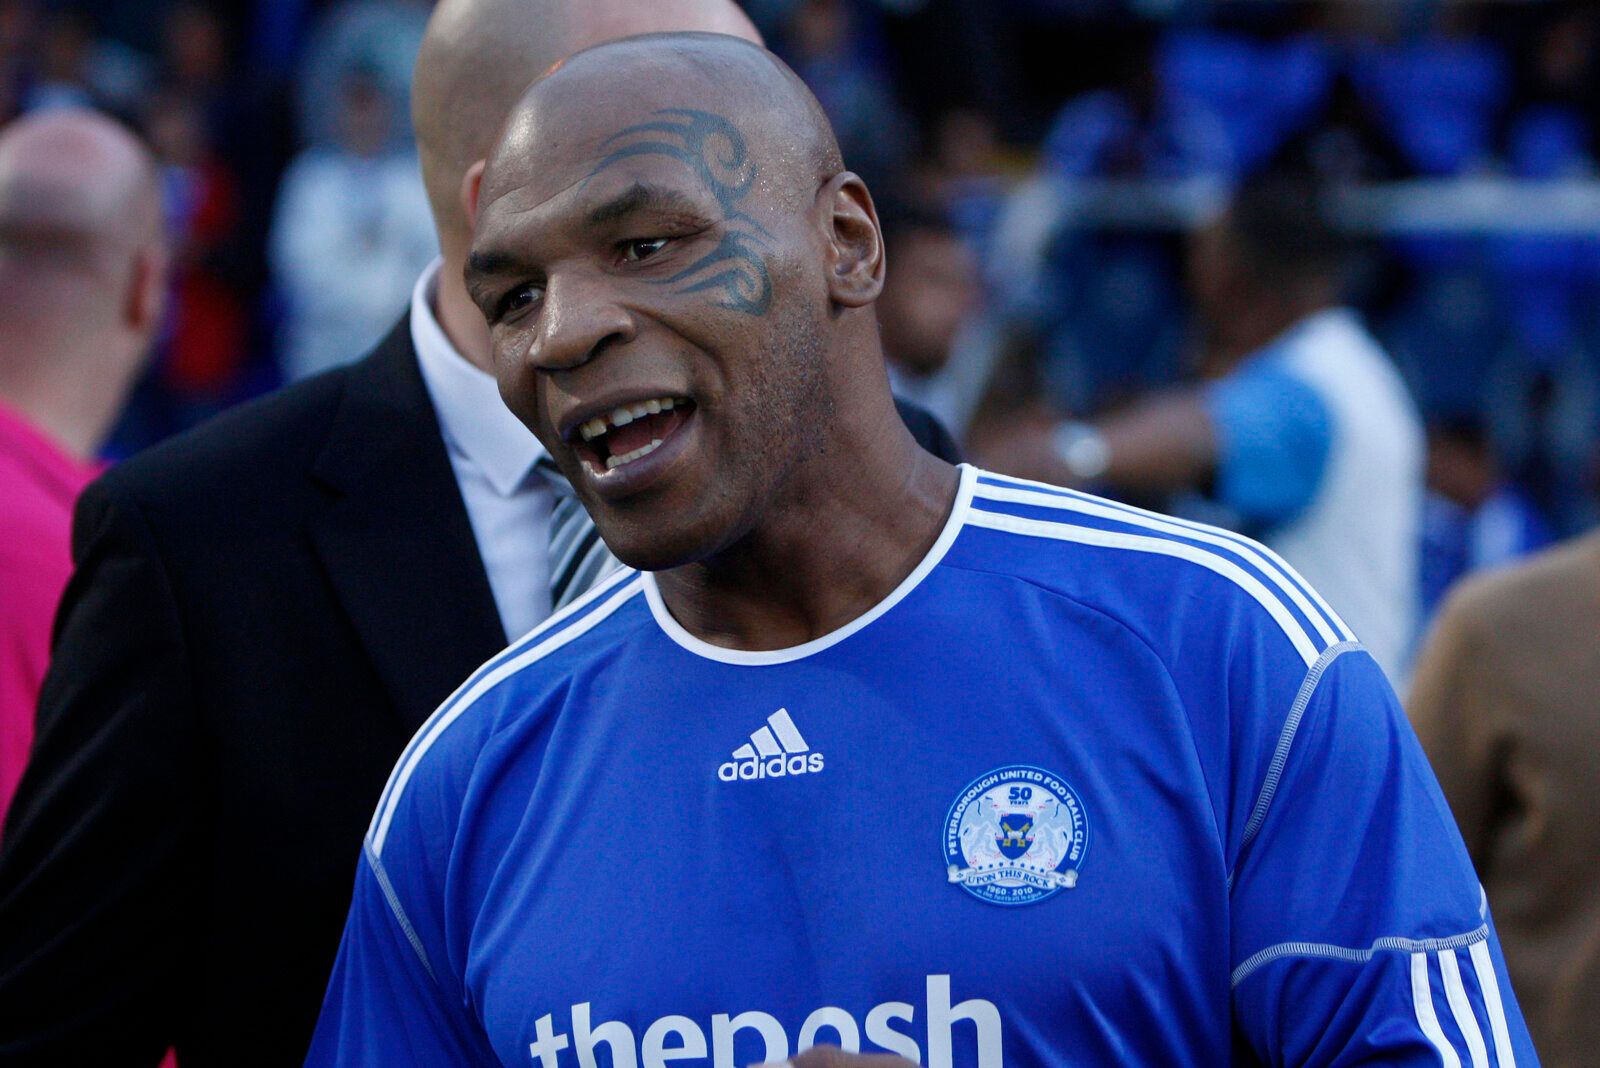 Football - Peterborough United v West Ham United Pre Season Friendly - London Road - 10/11 - 14/7/10 
Former boxer Mike Tyson comes out on the pitch at half time at London Road 
Mandatory Credit: Action Images / Peter Cziborra 
Livepic